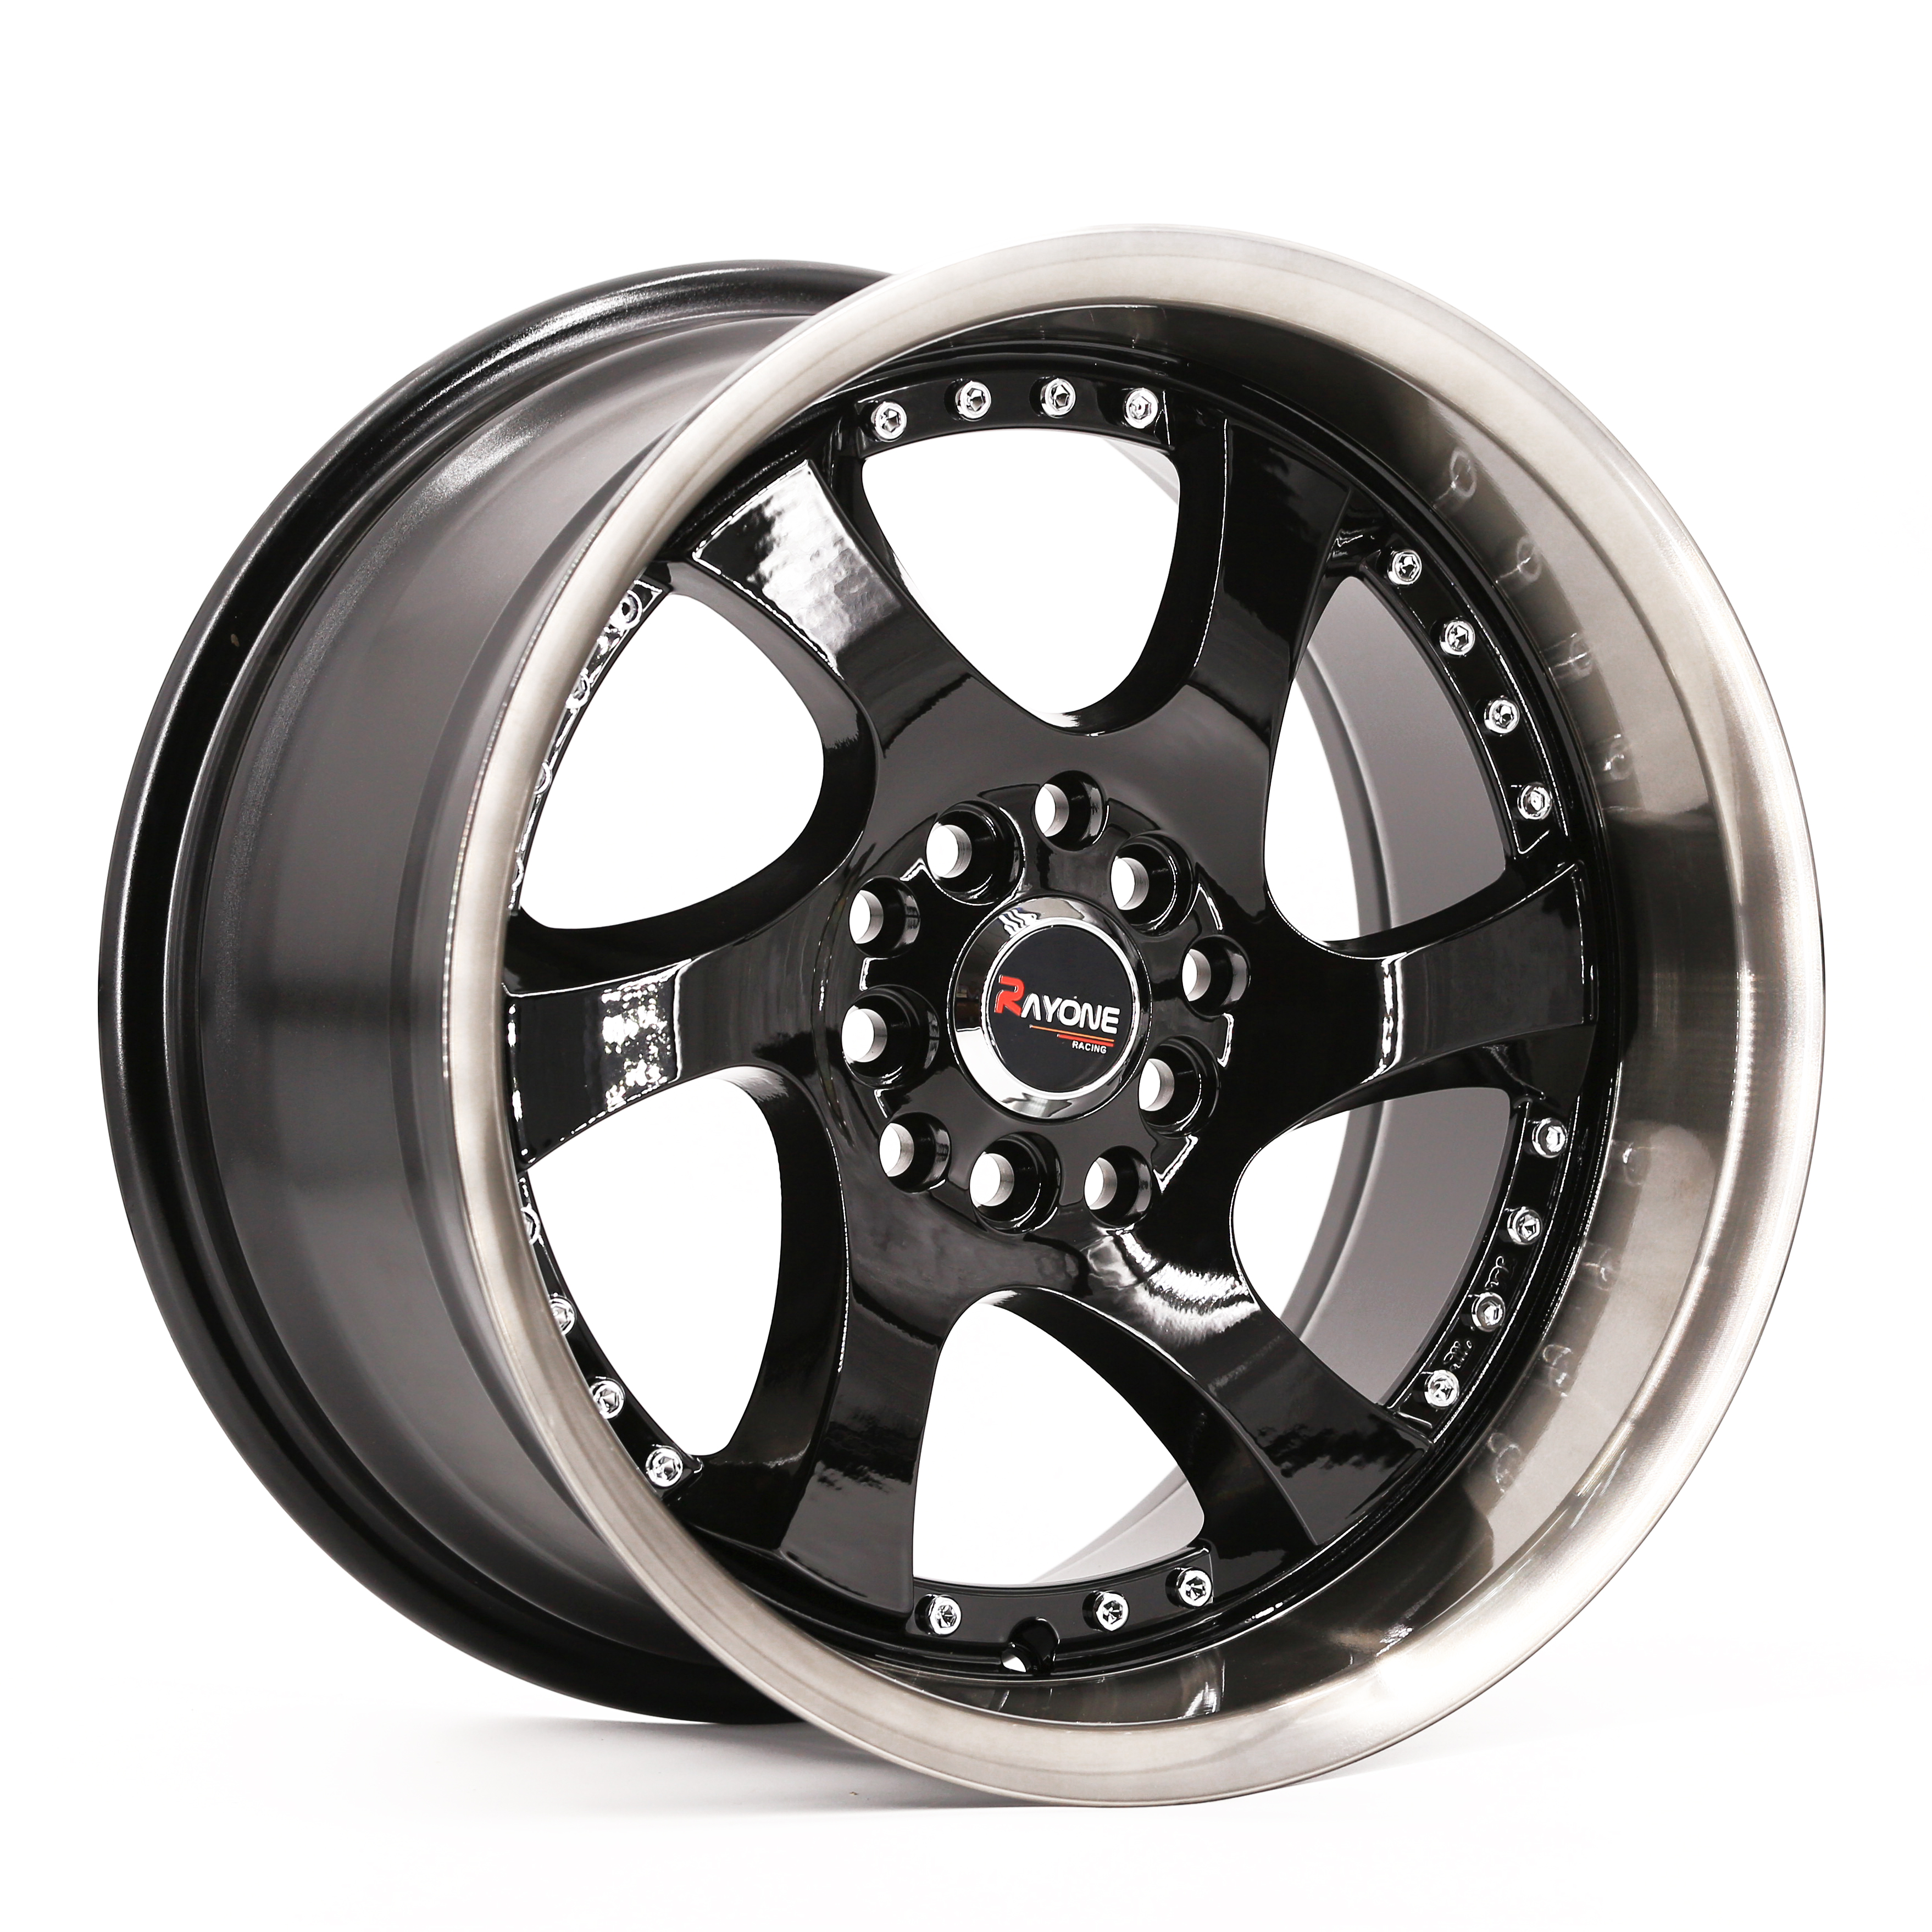 OEM/ODM China 16 Inch Forged Wheels - New design Passenger 16X8.5J ET25 Car alloy wheels with Custom holes – Rayone